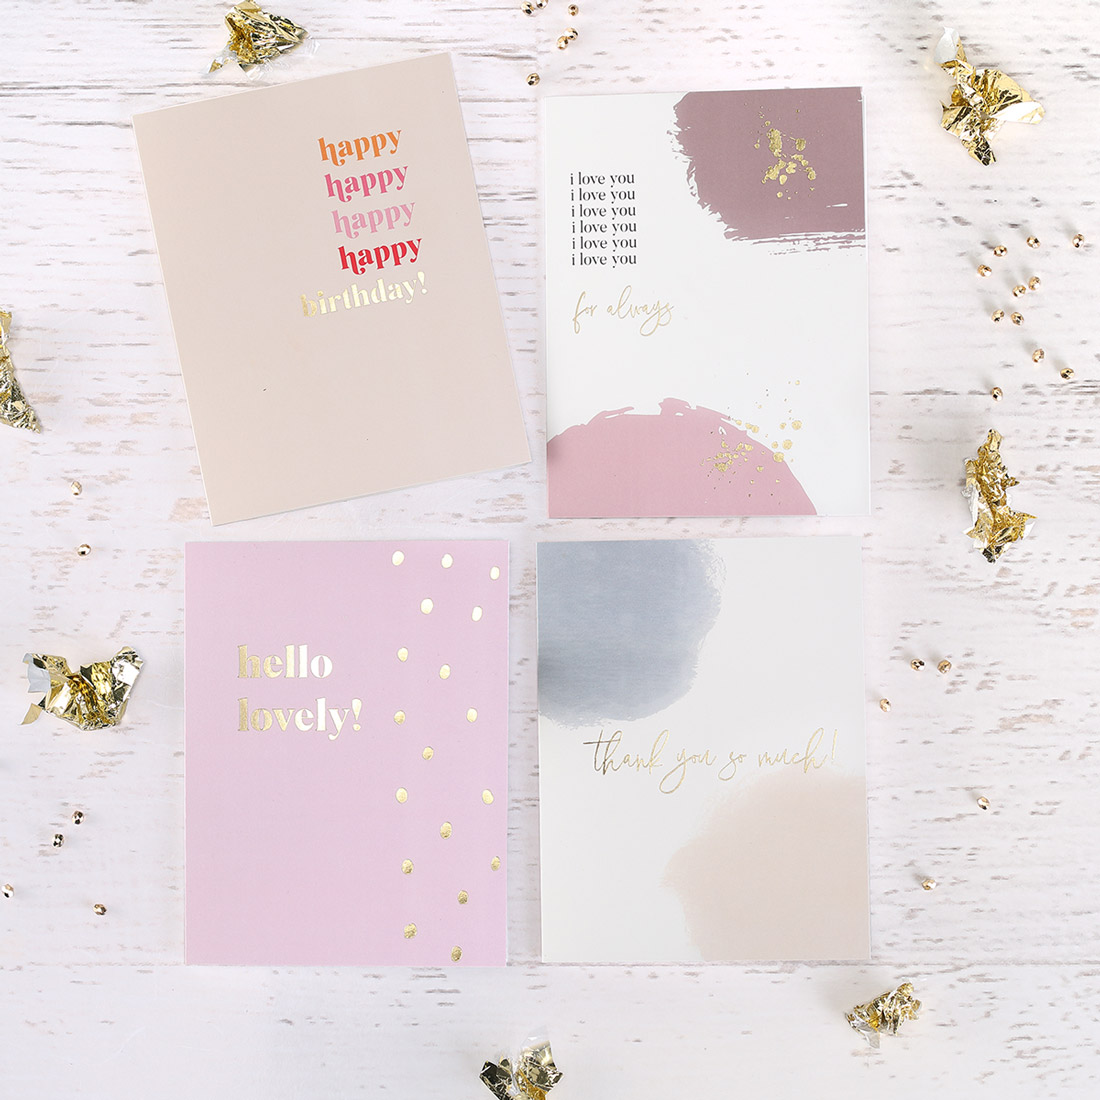 Modern and colorful greeting cards with gold foil are shown next to each other with crumpled gold foil decorations.